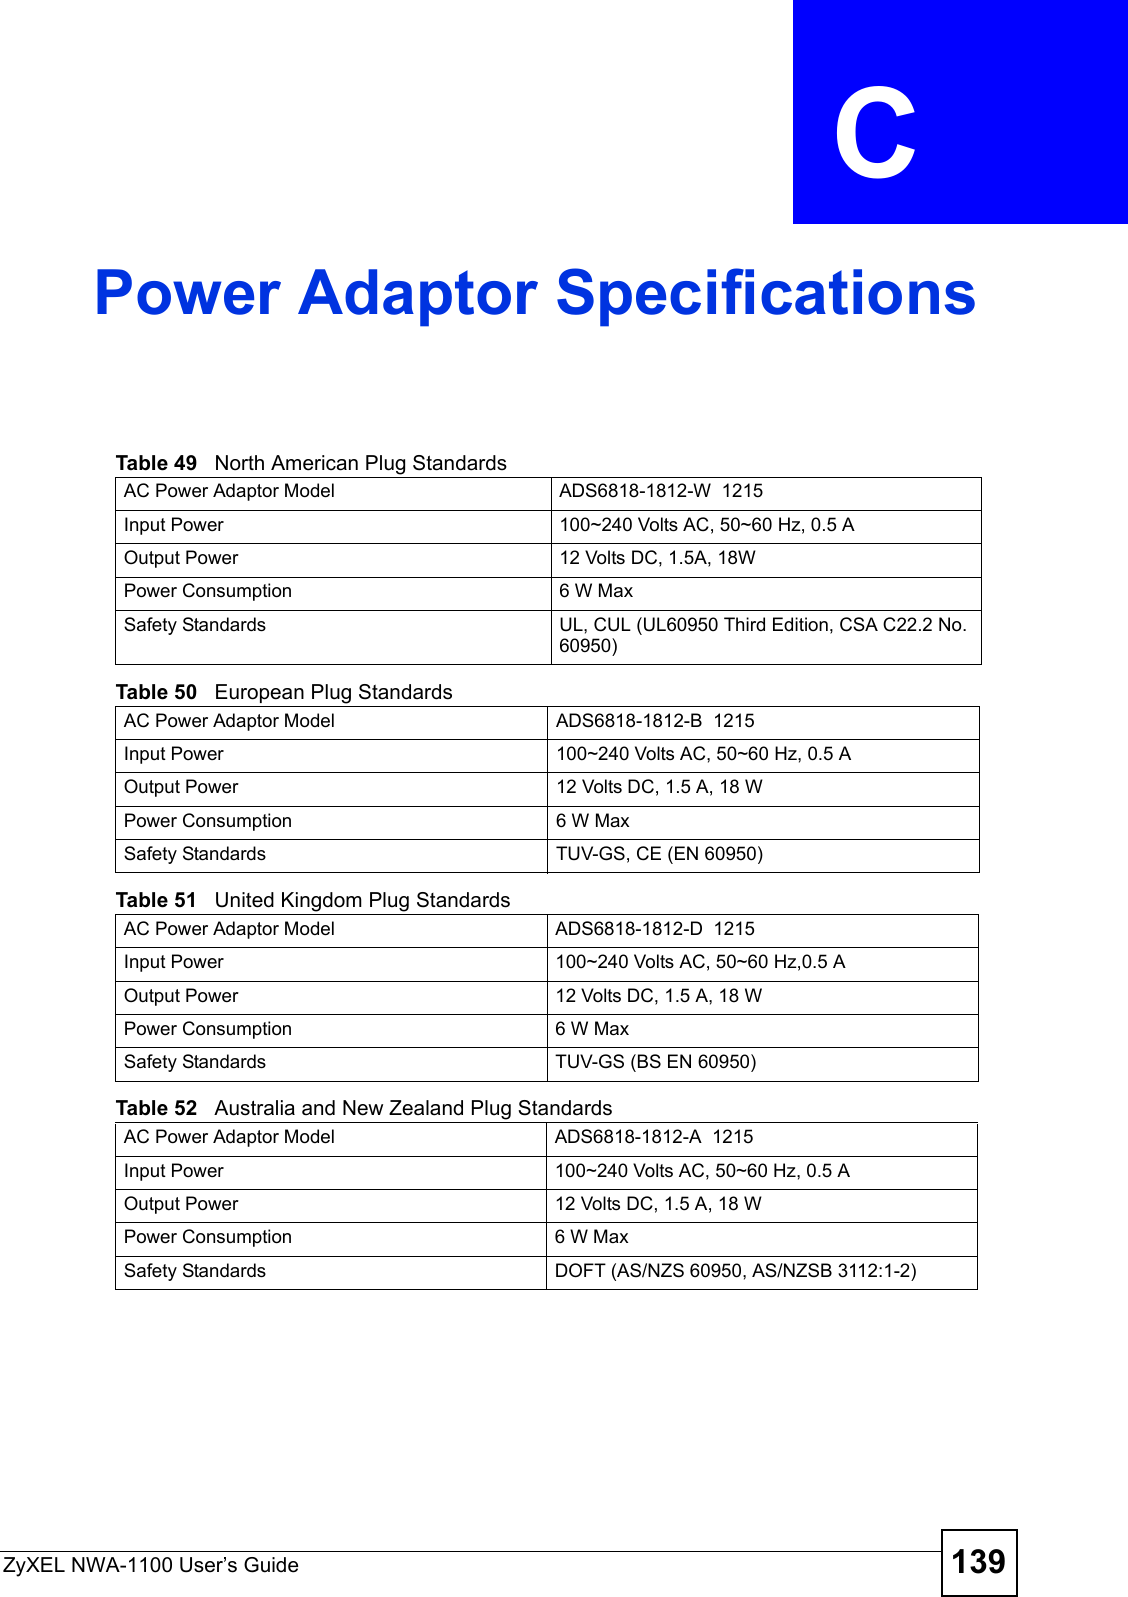 ZyXEL NWA-1100 User’s Guide 139APPENDIX  C Power Adaptor SpecificationsTable 49   North American Plug StandardsAC Power Adaptor Model  ADS6818-1812-W  1215Input Power 100~240 Volts AC, 50~60 Hz, 0.5 AOutput Power  12 Volts DC, 1.5A, 18WPower Consumption 6 W MaxSafety Standards  UL, CUL (UL60950 Third Edition, CSA C22.2 No. 60950)Table 50   European Plug StandardsAC Power Adaptor Model ADS6818-1812-B  1215Input Power 100~240 Volts AC, 50~60 Hz, 0.5 AOutput Power 12 Volts DC, 1.5 A, 18 WPower Consumption 6 W MaxSafety Standards TUV-GS, CE (EN 60950)Table 51   United Kingdom Plug StandardsAC Power Adaptor Model ADS6818-1812-D  1215Input Power 100~240 Volts AC, 50~60 Hz,0.5 AOutput Power 12 Volts DC, 1.5 A, 18 WPower Consumption 6 W MaxSafety Standards  TUV-GS (BS EN 60950)Table 52   Australia and New Zealand Plug StandardsAC Power Adaptor Model ADS6818-1812-A  1215Input Power 100~240 Volts AC, 50~60 Hz, 0.5 AOutput Power 12 Volts DC, 1.5 A, 18 WPower Consumption 6 W MaxSafety Standards  DOFT (AS/NZS 60950, AS/NZSB 3112:1-2)